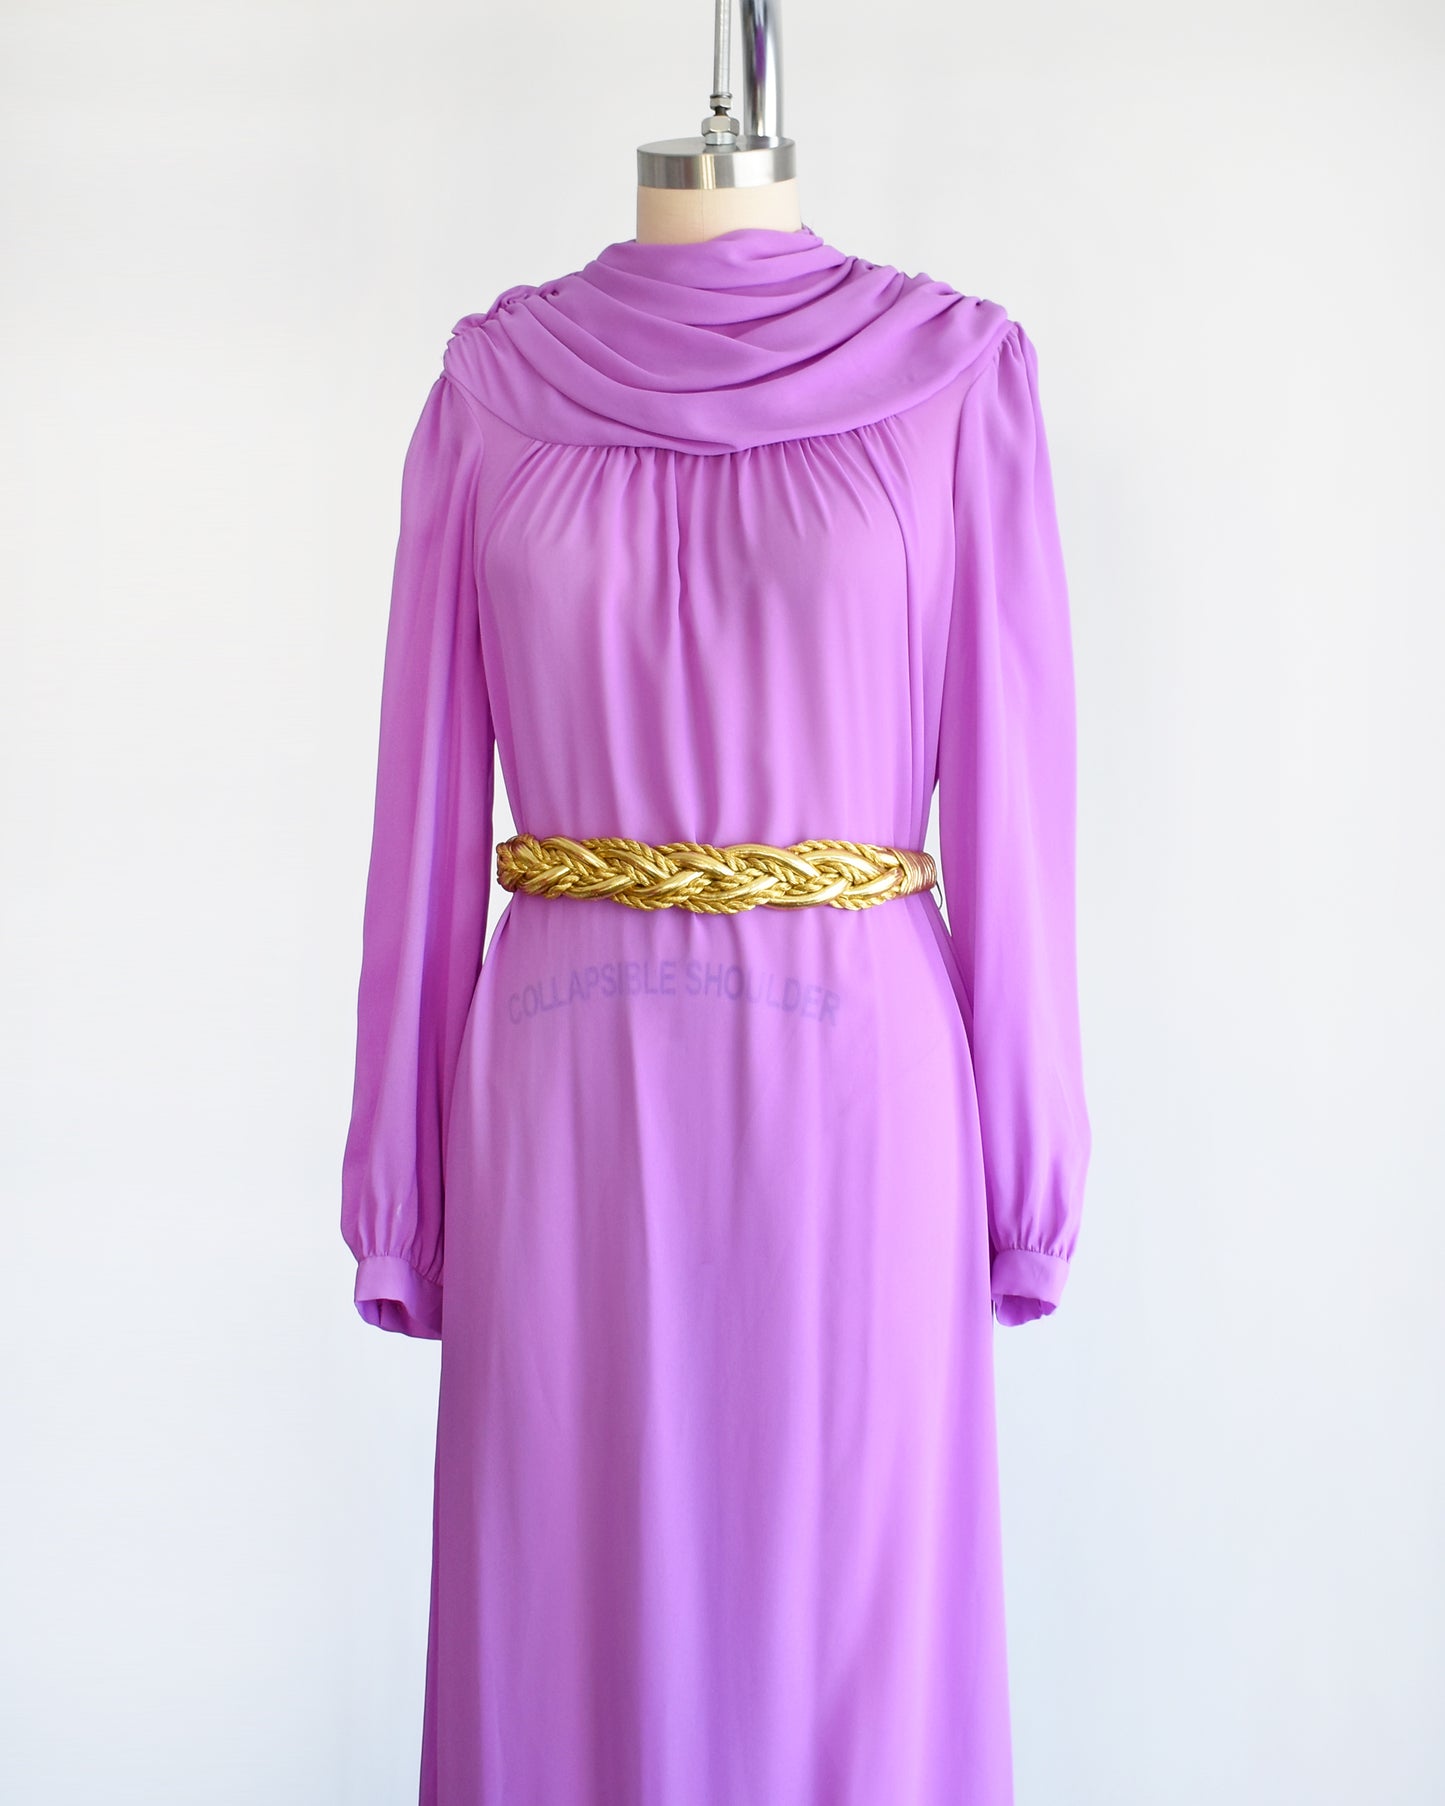 Side front view of a vintage 1970s purple semi sheer maxi dress by Joy Stevens California that has a draped neckline and long sleeves with gold belt which isn't included